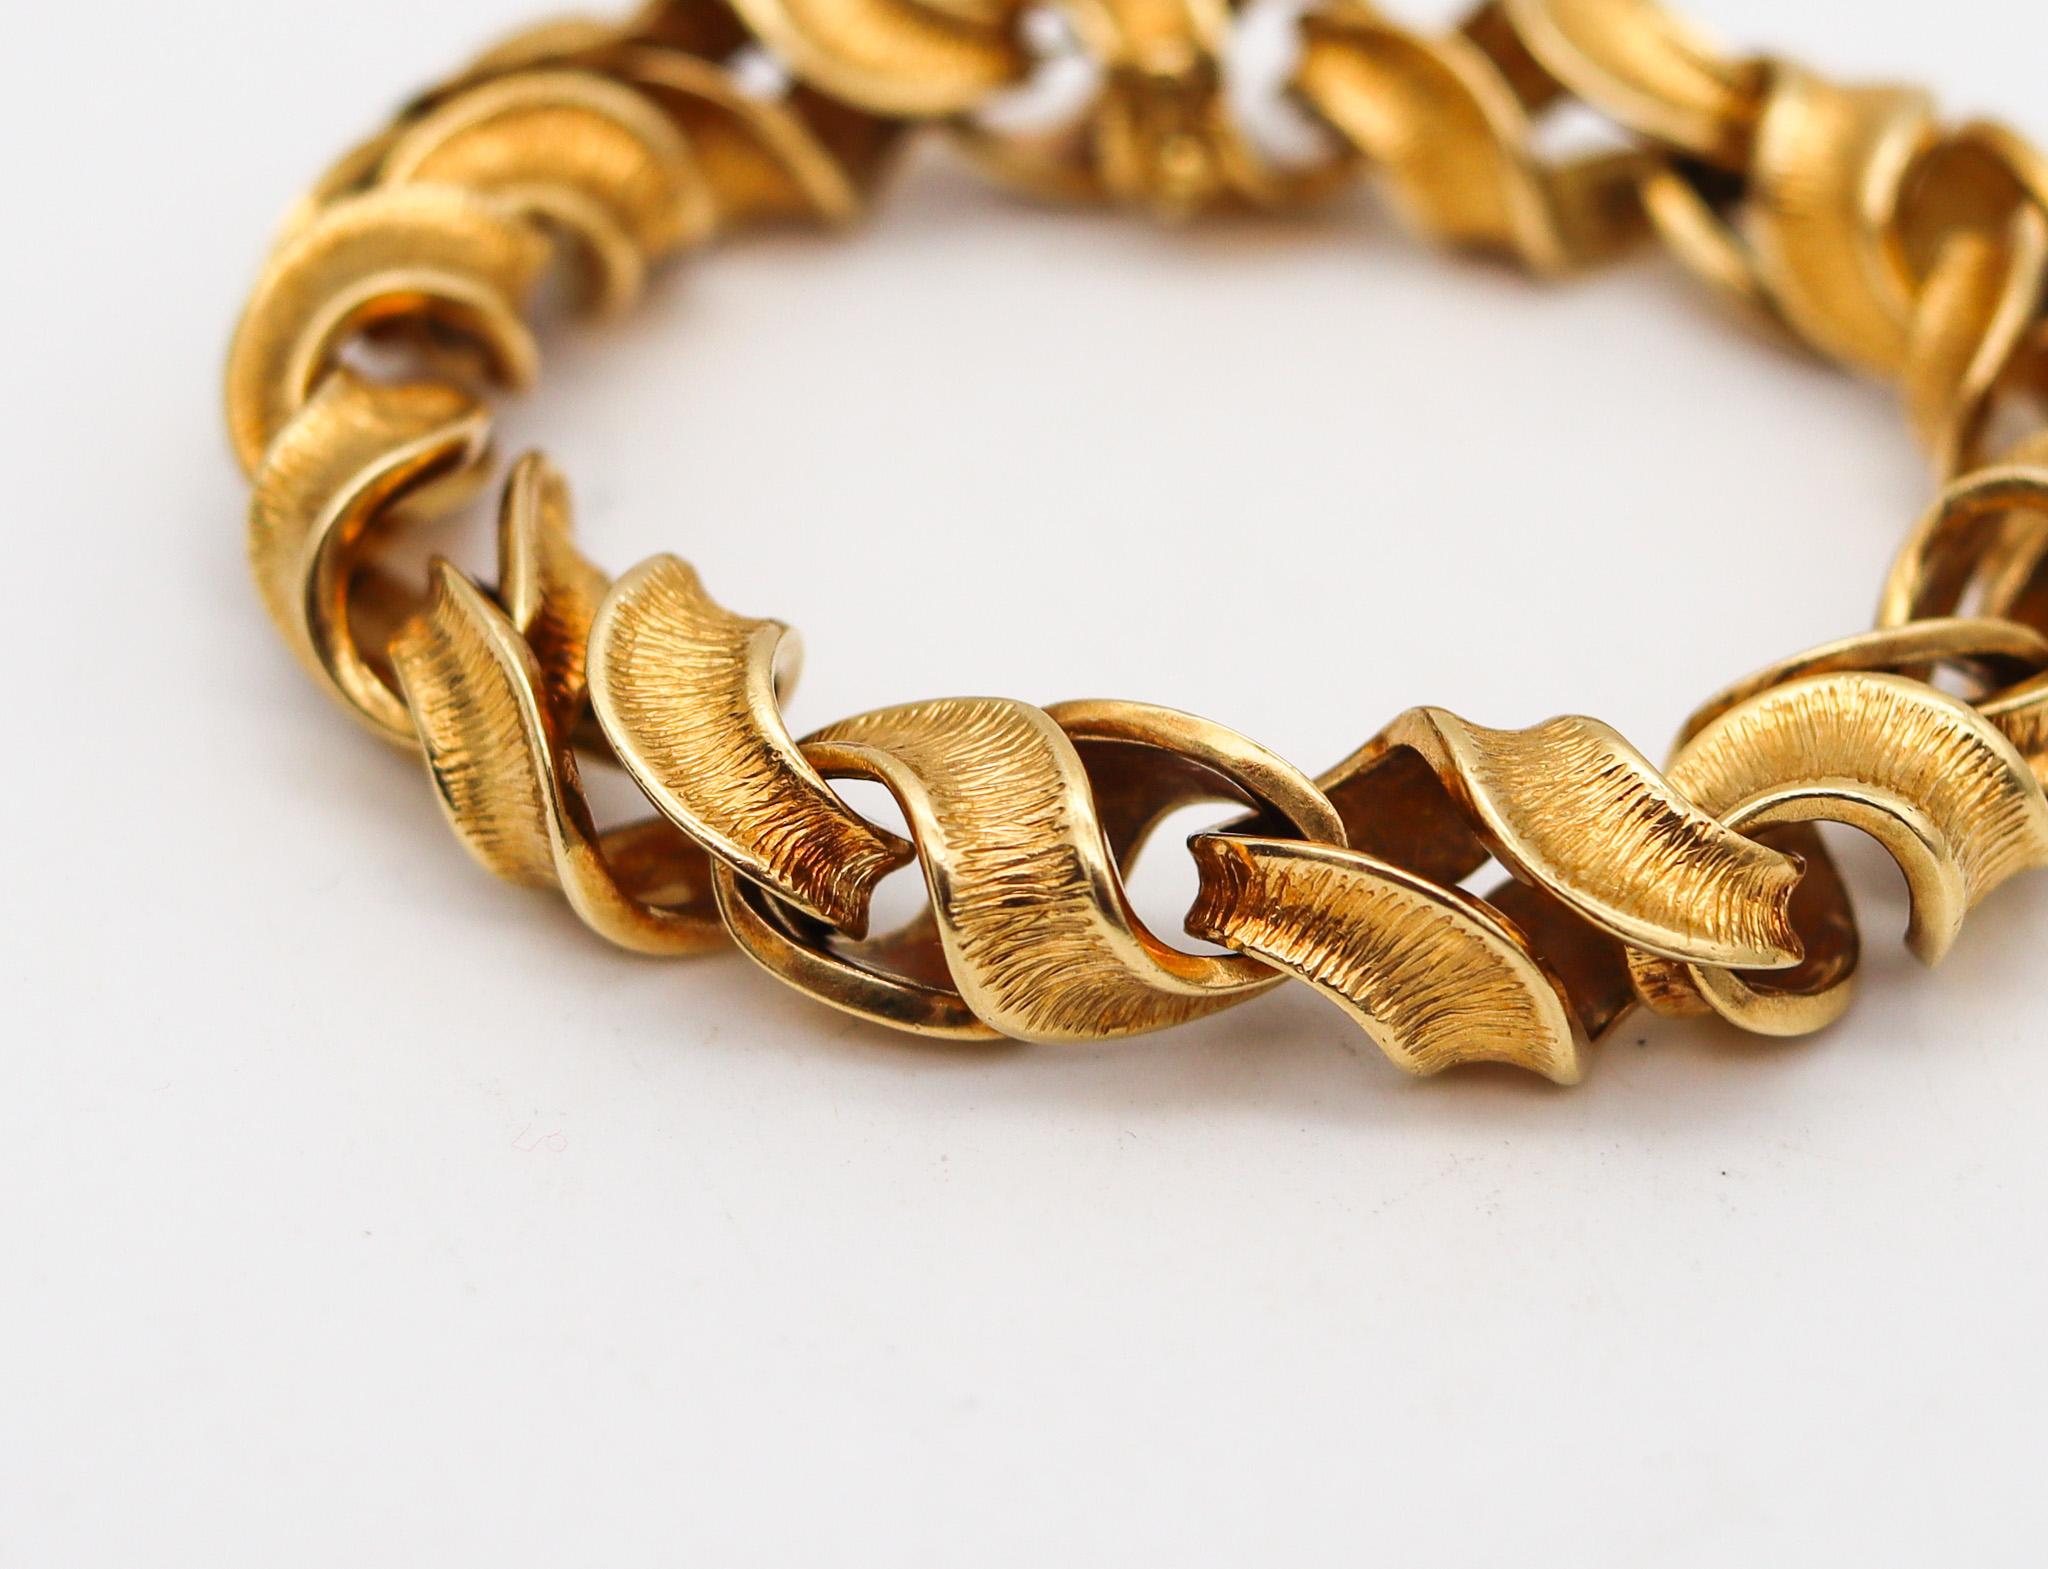 Riccardo Masella 1960 Modernist Twisted Bracelet In Solid 18Kt Yellow Gold In Excellent Condition For Sale In Miami, FL